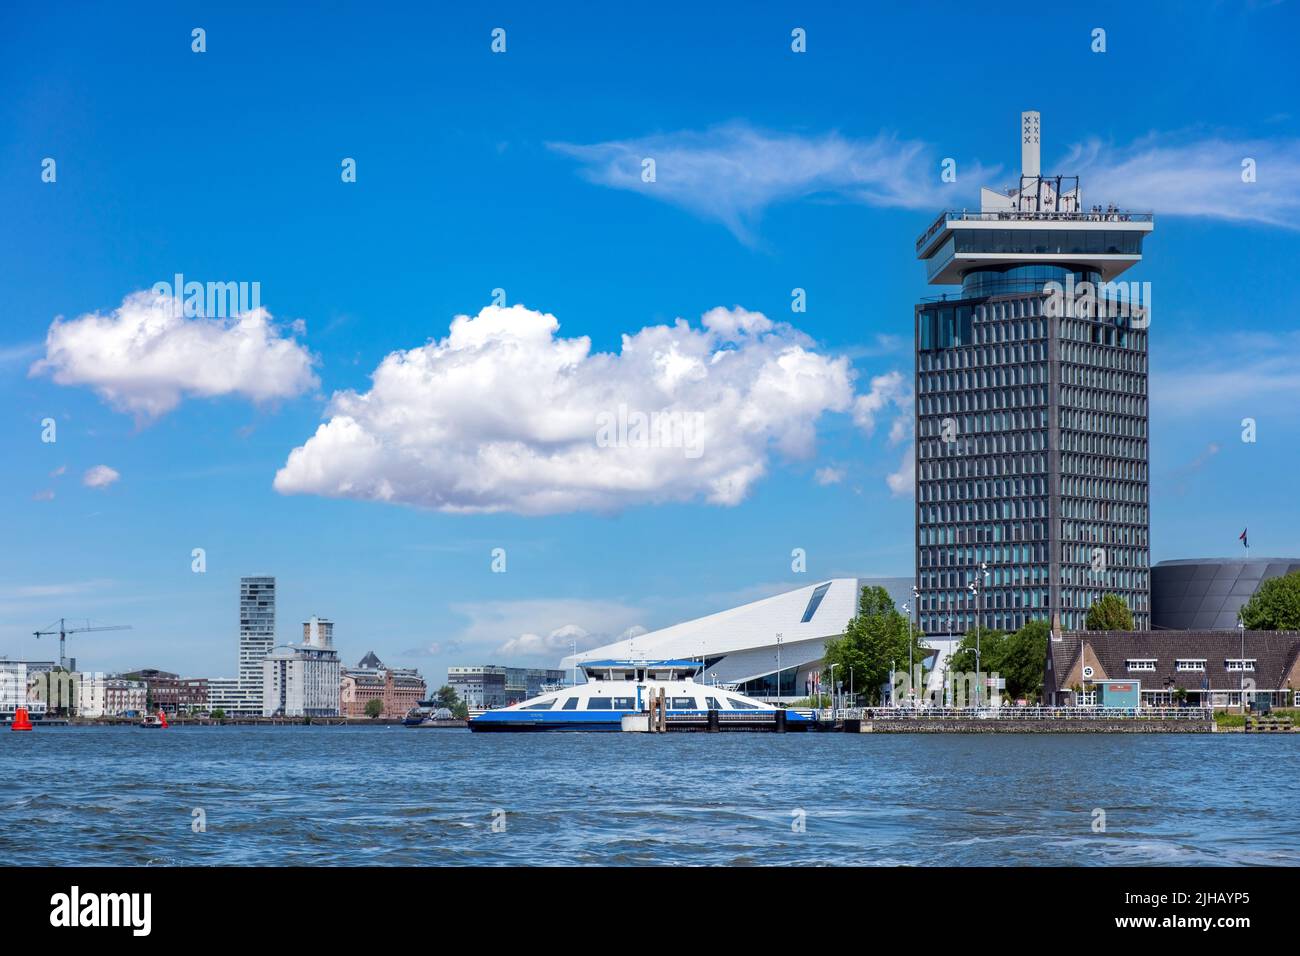 Eye Filmmuseum Amsterdam, modern skyscraper, film archive and cinema, Holland Netherlands. Waterfront high rise building, cloudy blue sky background. Stock Photo